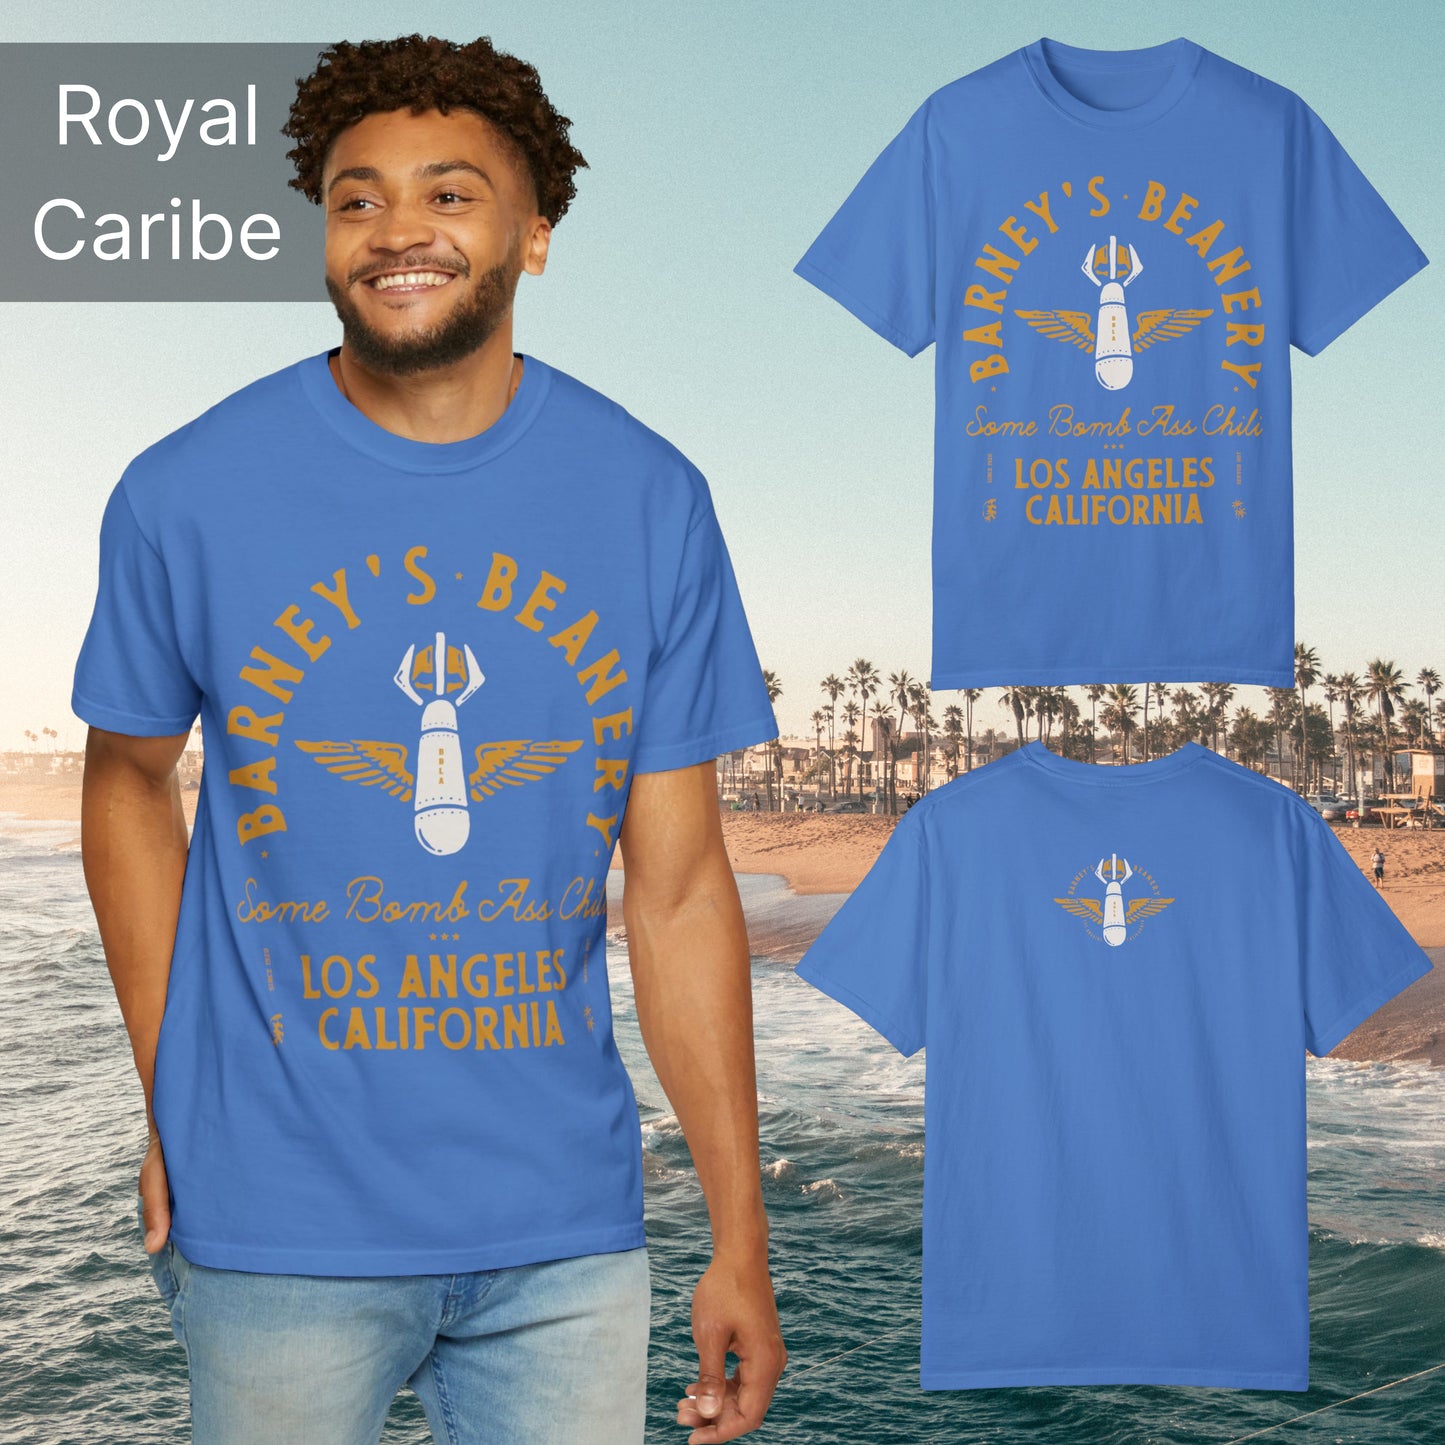 Some Bomb Ass Chili | BARNEY'S BEANERY - Men's Graphic Tee | Royal Caribe Comfort Colors 1717 T-Shirt - All Graphics On Front And Back Flat Lay View